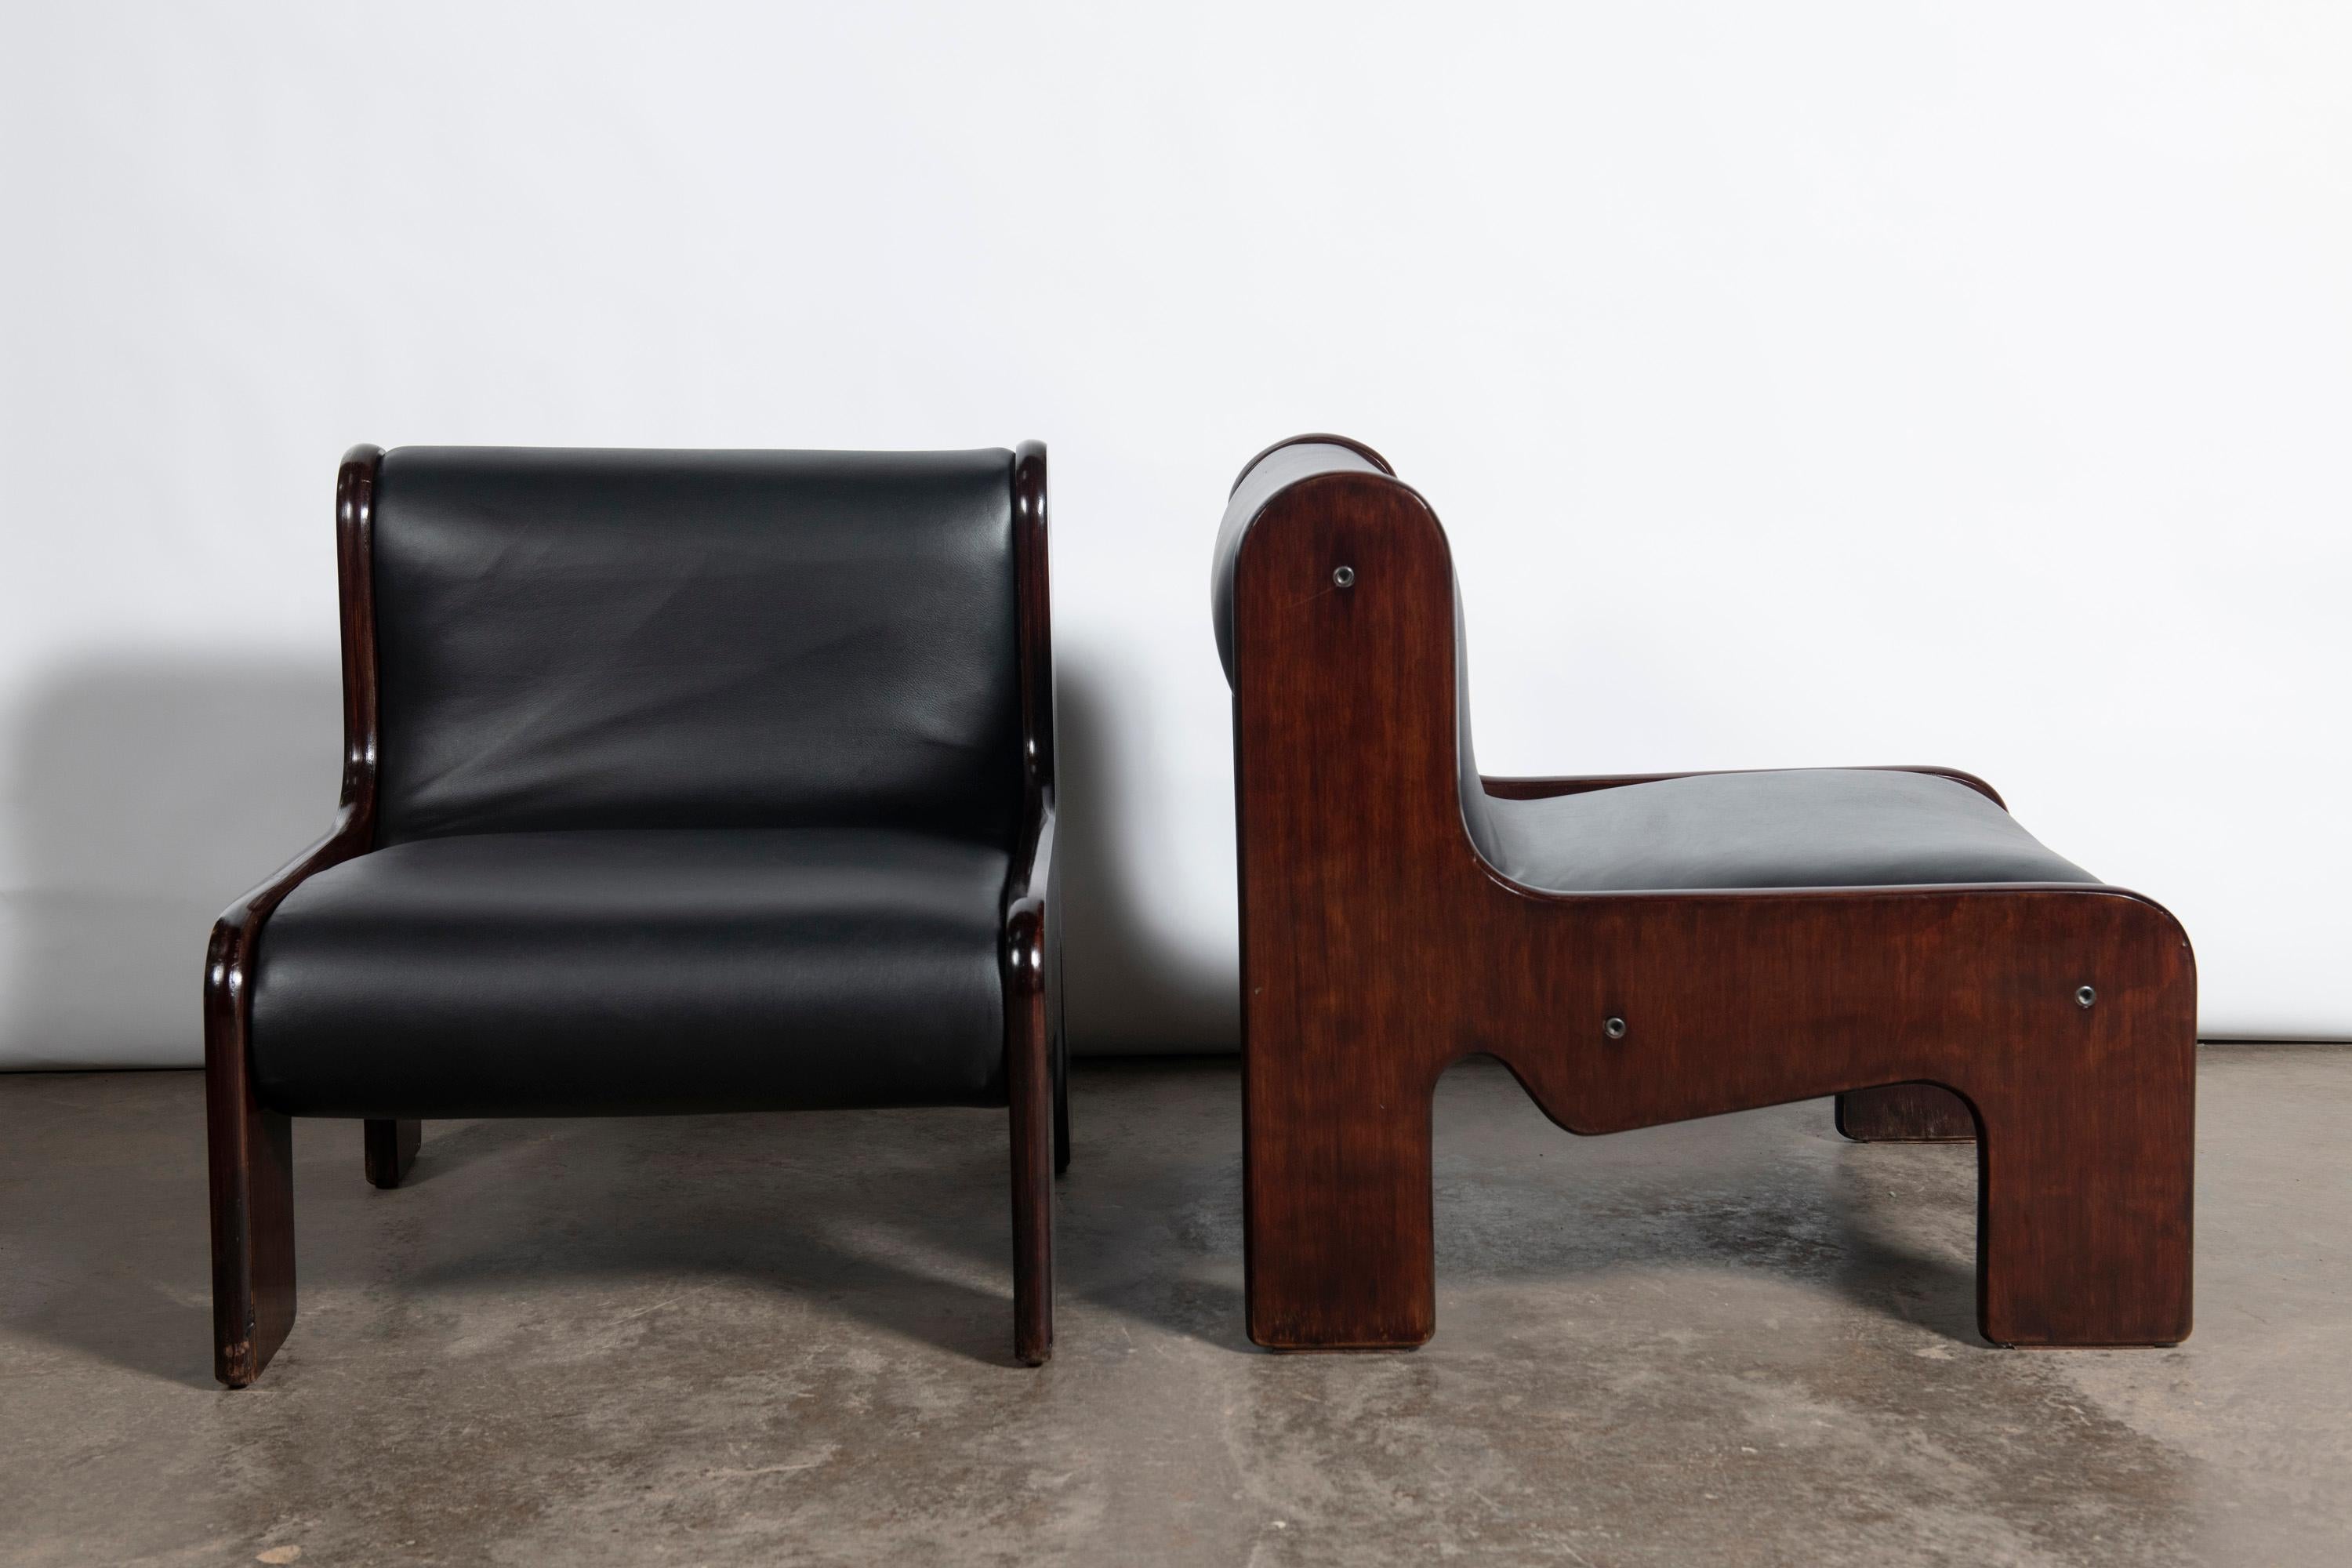 Wood and leather set of 3 LP sofas designed by Ricardo Blanco, Argentina, 1970.

Dimensions of the LP large sofa: 67 cm height, 120 cm width, 70 cm depth.
Dimensions of the LP small sofas: 67 cm height, 62 cm width, 70 cm depth.